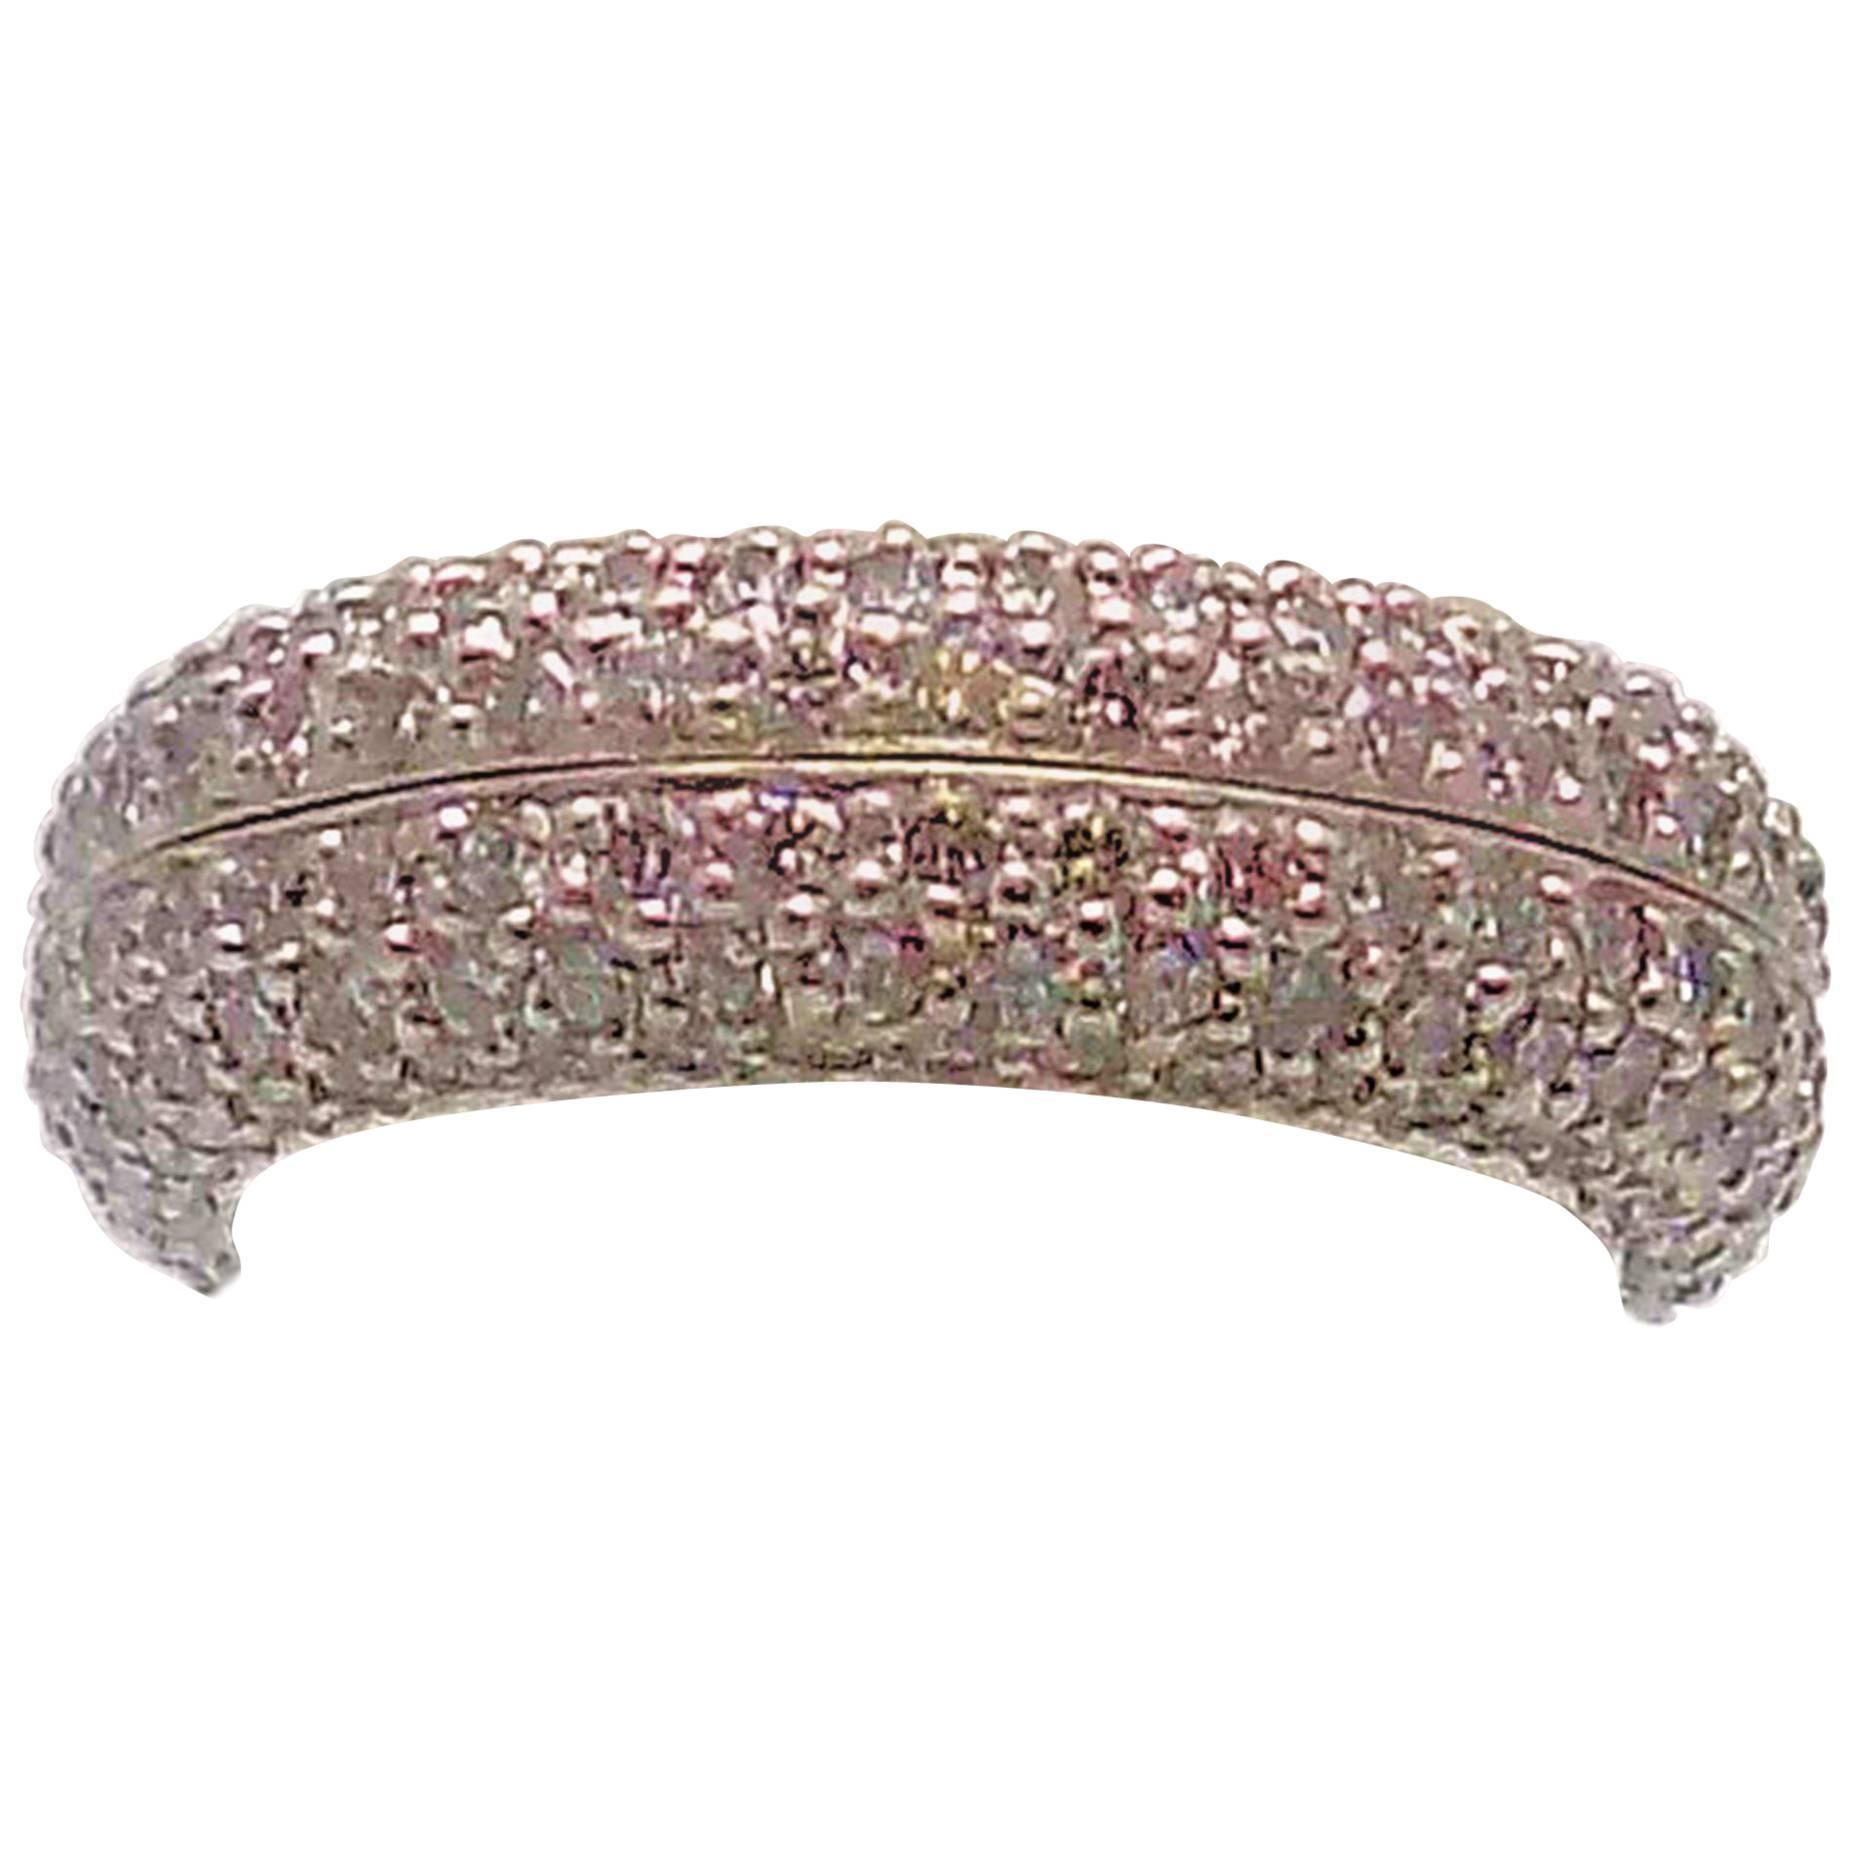 Pair of Platinum Pave' Diamond Eternity Bands by Matthew Trent For Sale